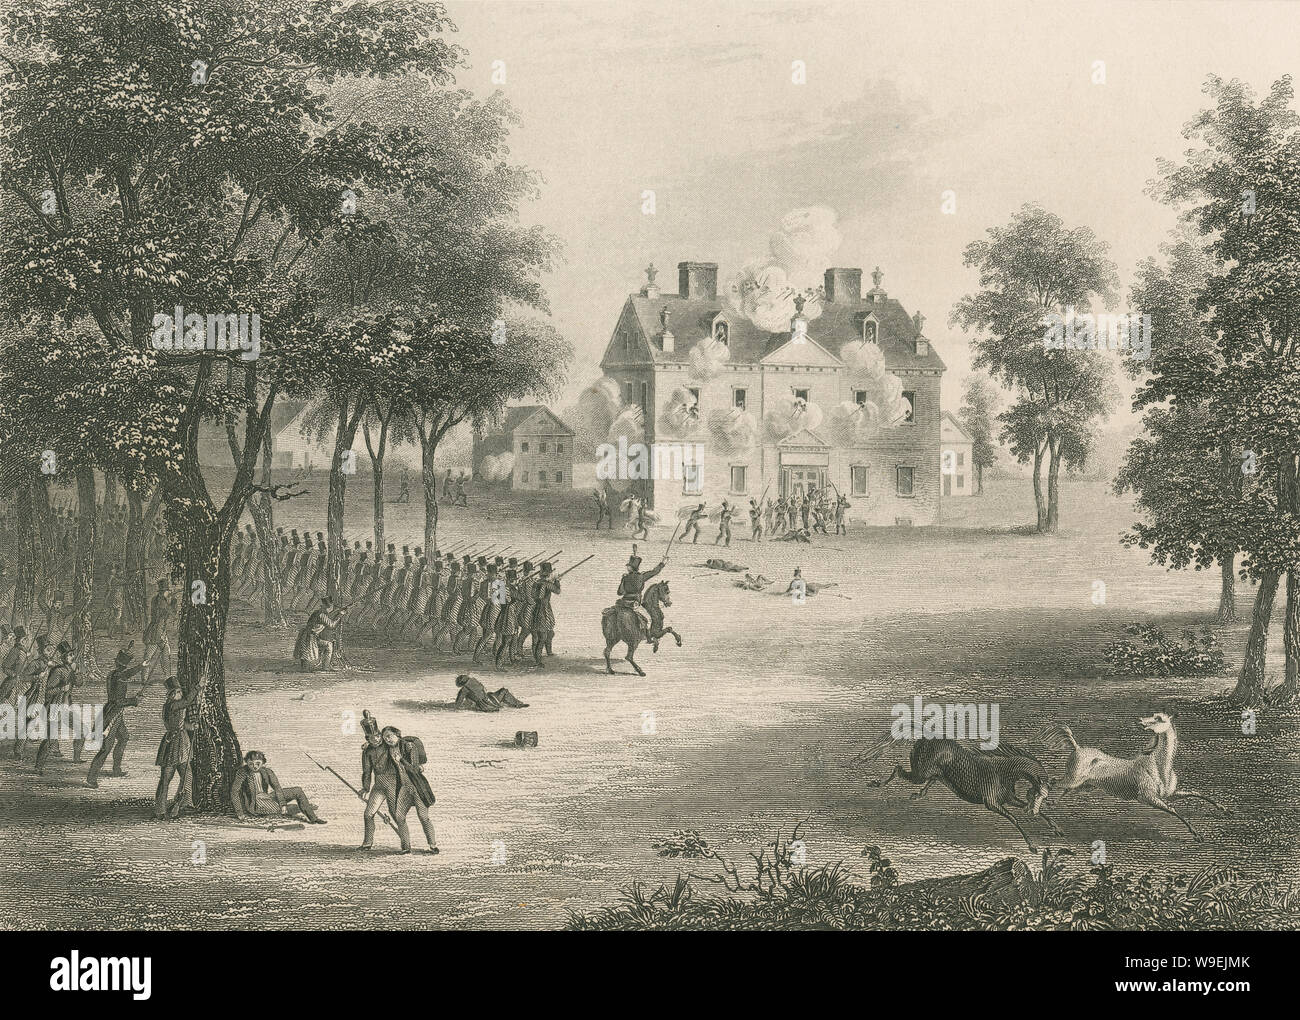 Antique 1873 steel engraving, American forces lay siege to the Chew house during the Battle of Germantown. Drawn by A. Koellner; engraved by Rawdon Wright & Hatch. The Battle of Germantown was a major engagement in the Philadelphia campaign of the American Revolutionary War. SOURCE: ORIGINAL ENGRAVING Stock Photo